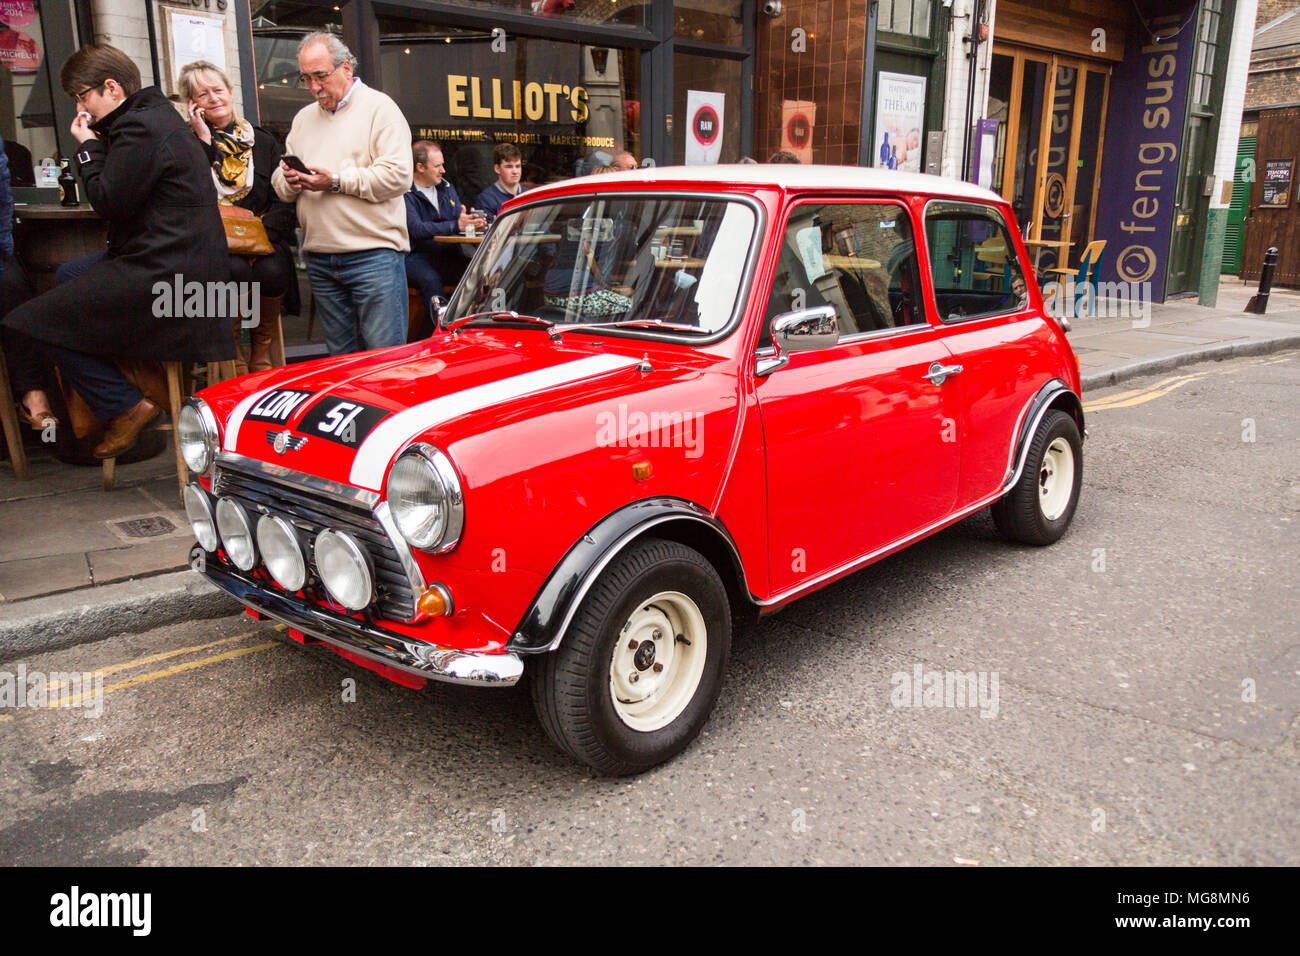 London, United Kingdom - May 2, 2015: A 1951 Mini motor car sits on a street near Borough Market in the heart of London, gleaming and shiny in red. Stock Photo